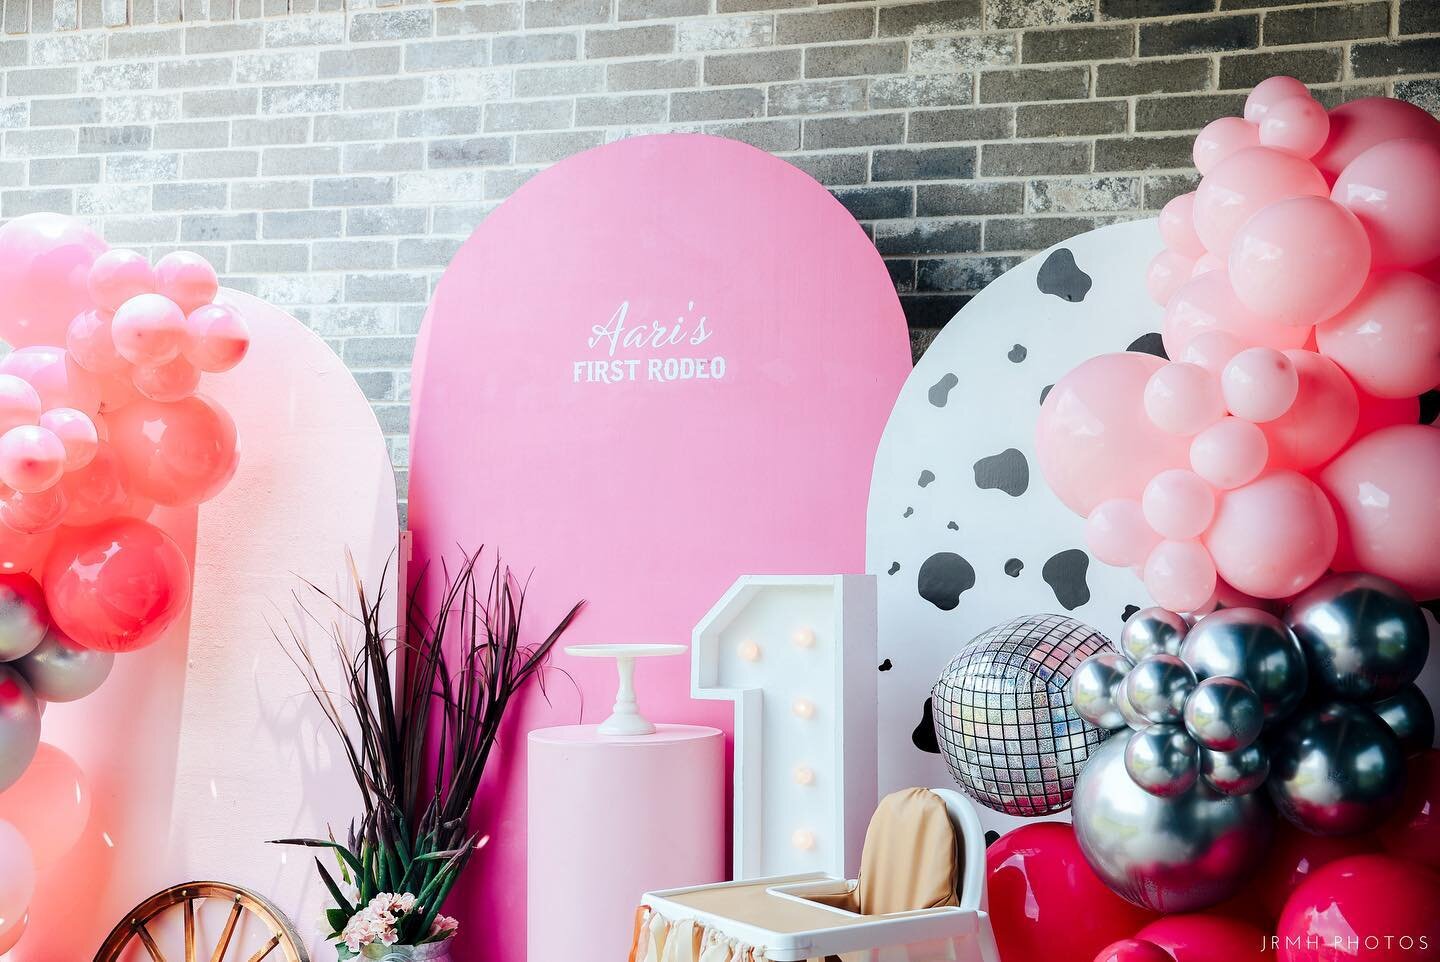 Aari&rsquo;s First Rodeo 💕

Decor @evangelinedesigns 
Photography @jrmhphotos 
Pink bounce house @letsbounceparty 
.
.
.
.
.
.

#birthdayparty #partyslate #vibes #birthday #decor #desserttable #instalove #instagood #iphonesia  #igdaily #bestoftheday